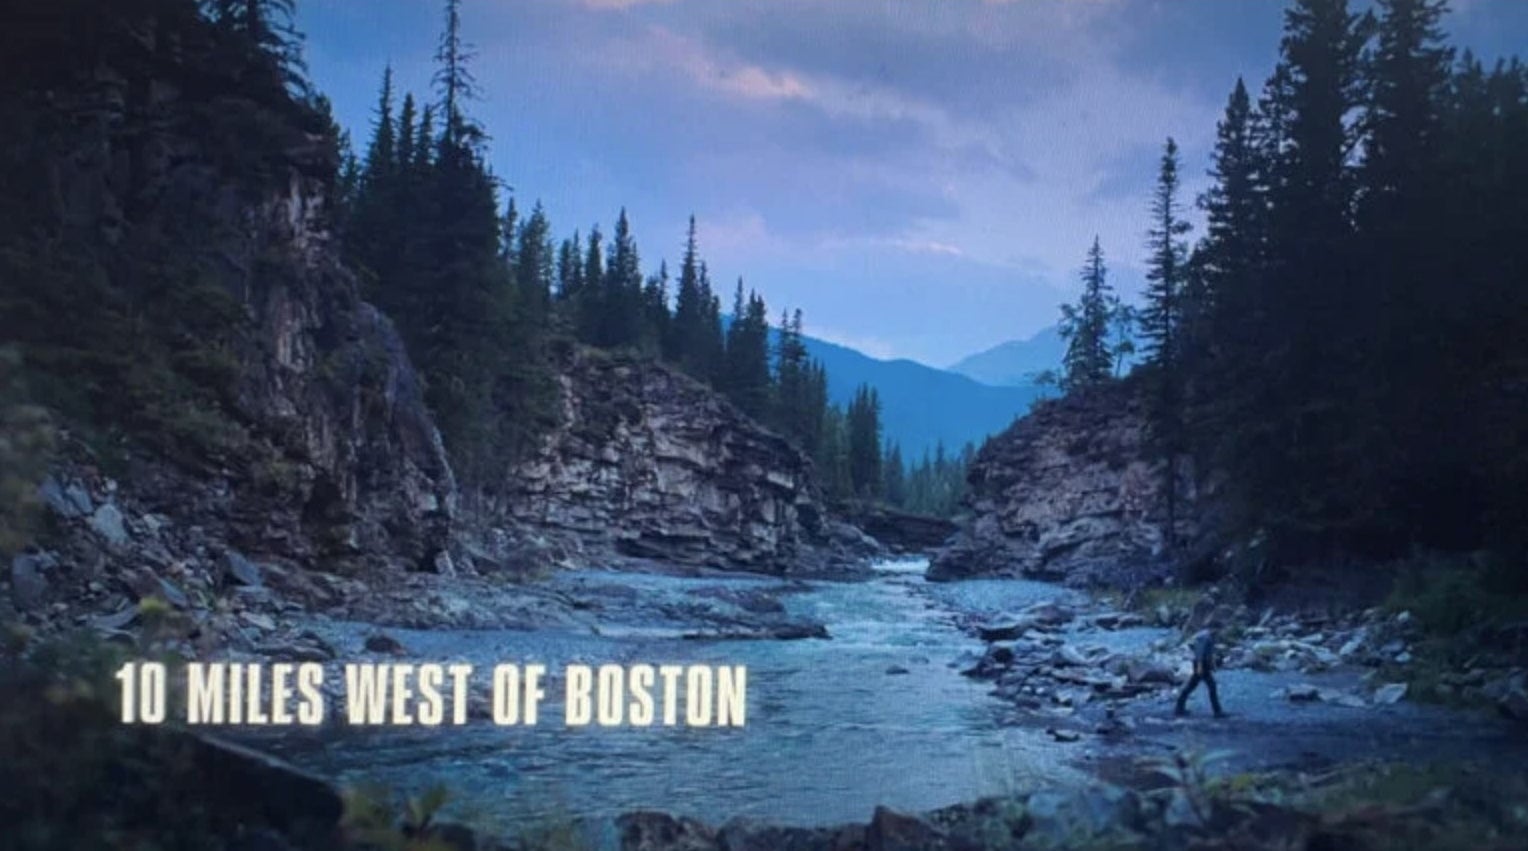 A creek with mountains in the background and a caption that says &quot;10 miles west of Boston&quot;